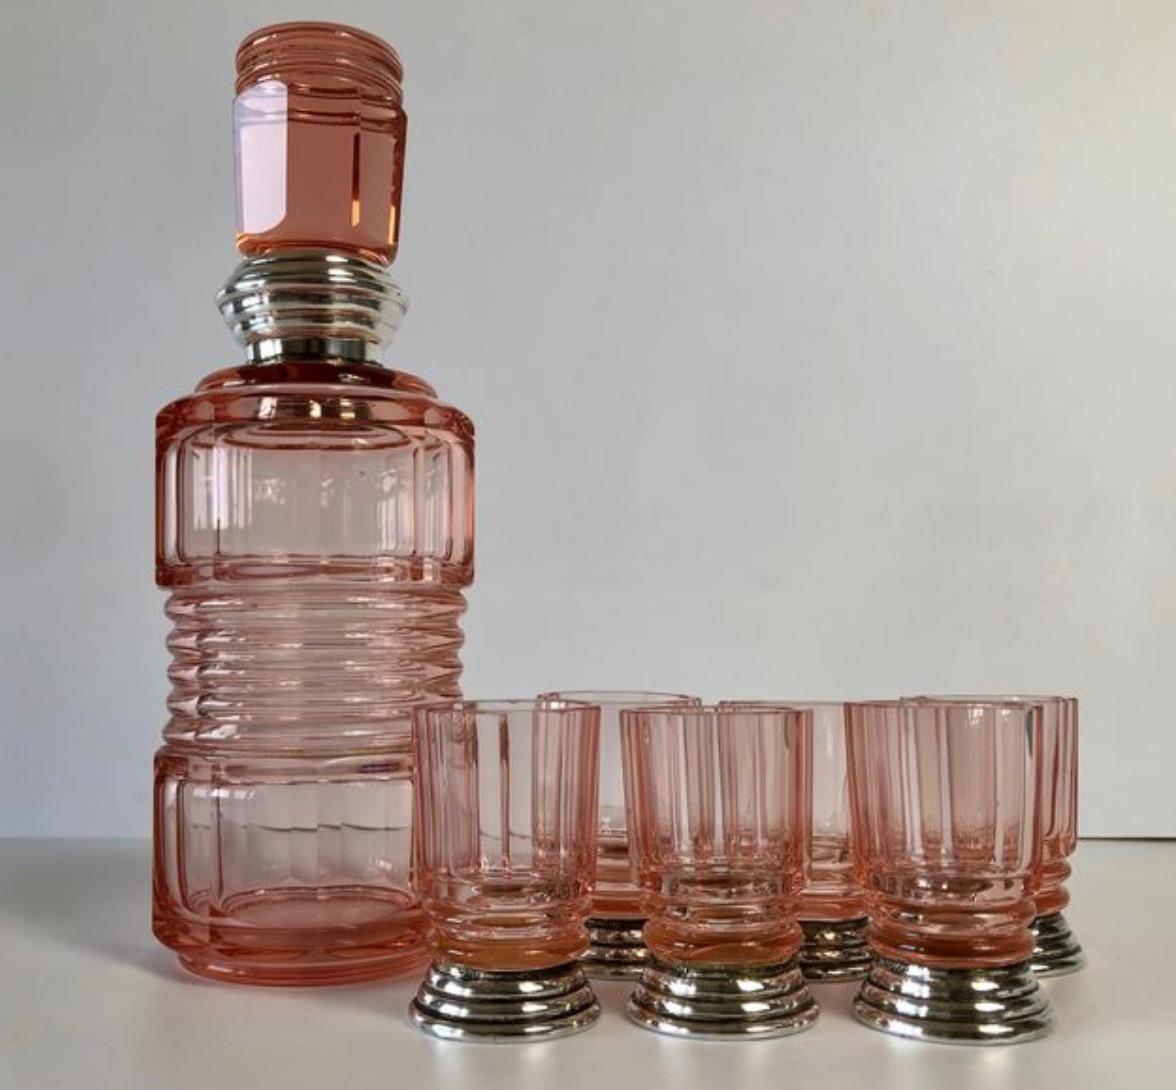 Art Decò Liqueur Set with Glasses Set with Silver 800. Antique liqueur set, consisting of a decanter and 6 small glasses in light pink facetted crystal, decorated with 800 stamped silver. Art Deco period and in excellent condition

This set is very